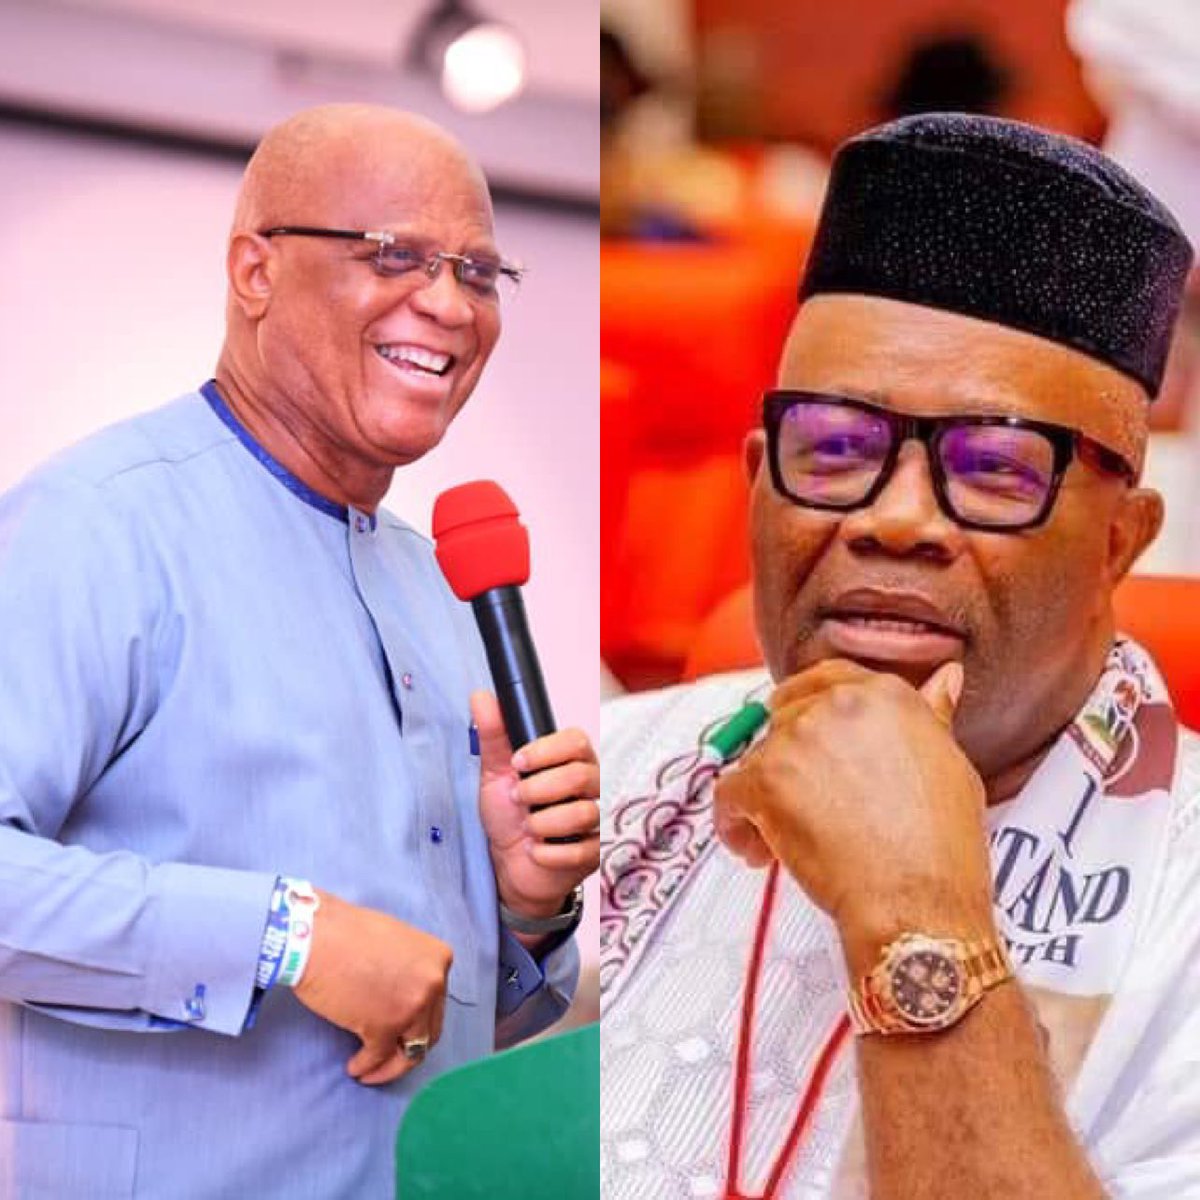 Governor Umo Eno Congratulates Newly Elected Senate President, Godswill Akpabio, CON.

…pledges to work together for the advancement of the State.

Akwa Ibom State Governor, Pastor Umo Eno, has congratulated Distinguished Senator Godswill Akpabio, CON, on his emergence as the